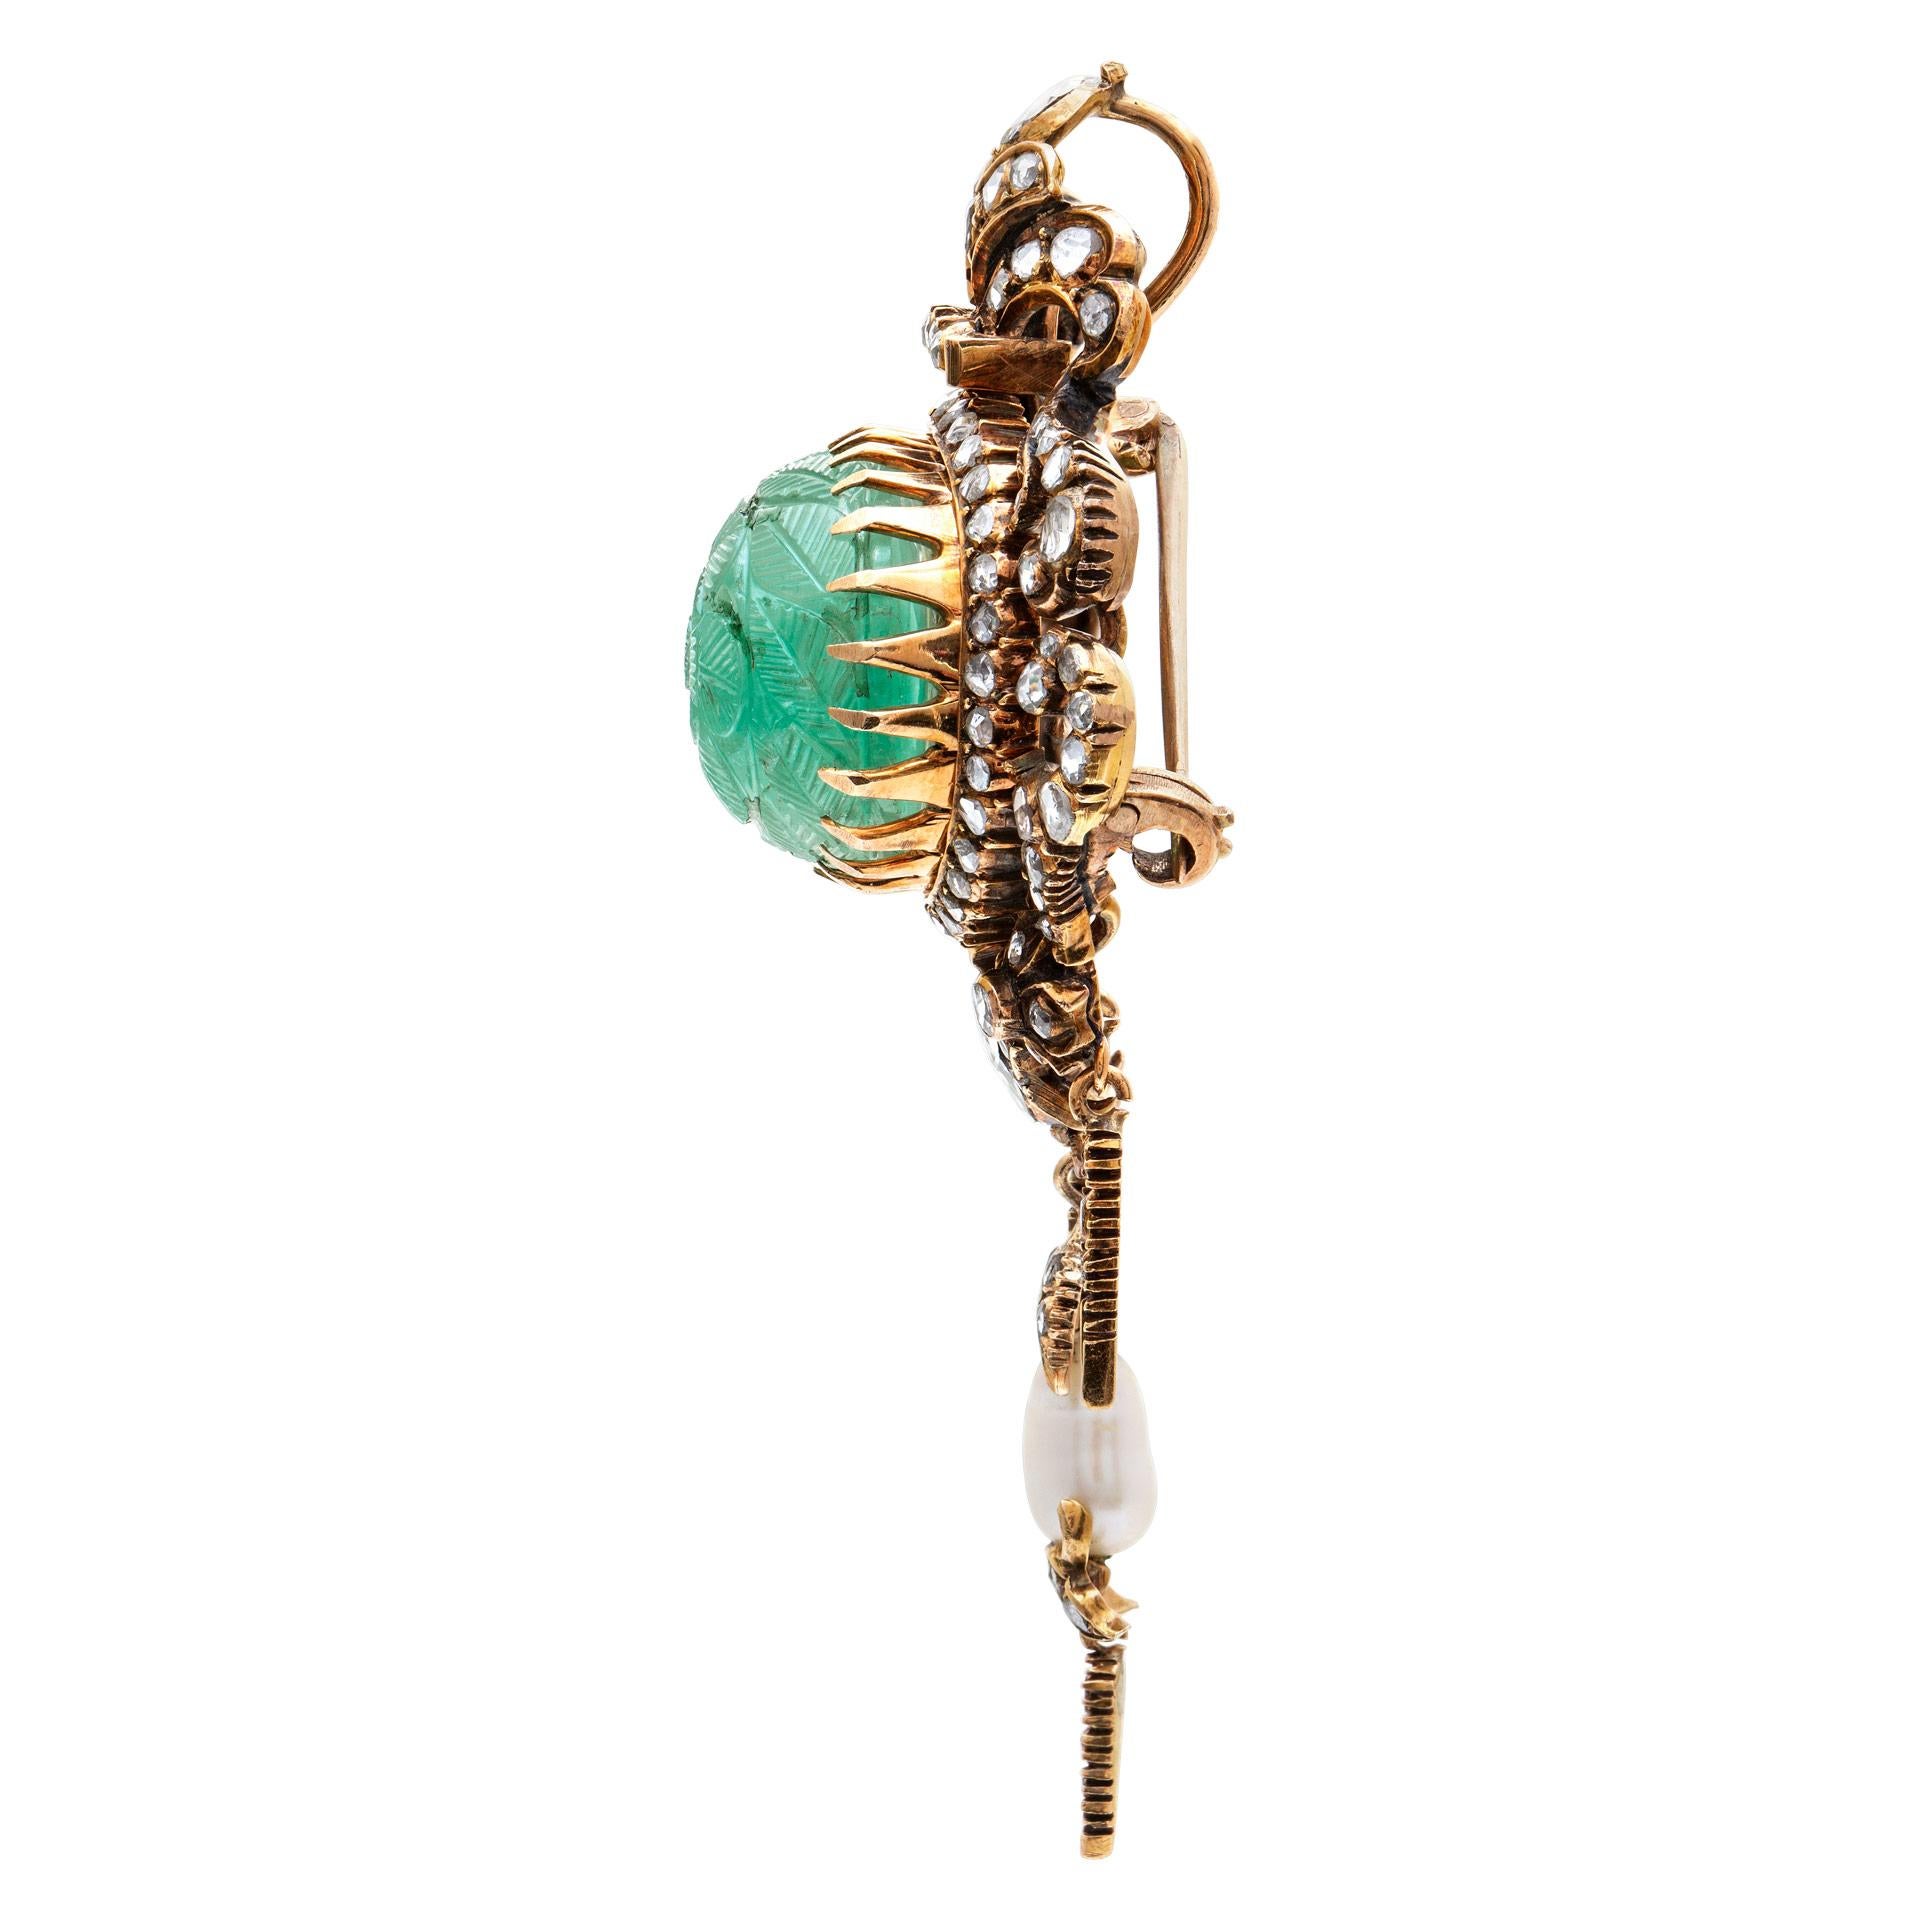 ESTIMATED RETAIL: $12,600 YOUR PRICE: $8,340 - Antique Broach/Pendant with an over 40 carat carved emerald cabochon accented with rose & cushion cut diamonds set in 14K yellow gold. One natural pear shape natural pearl. 75mm height (including